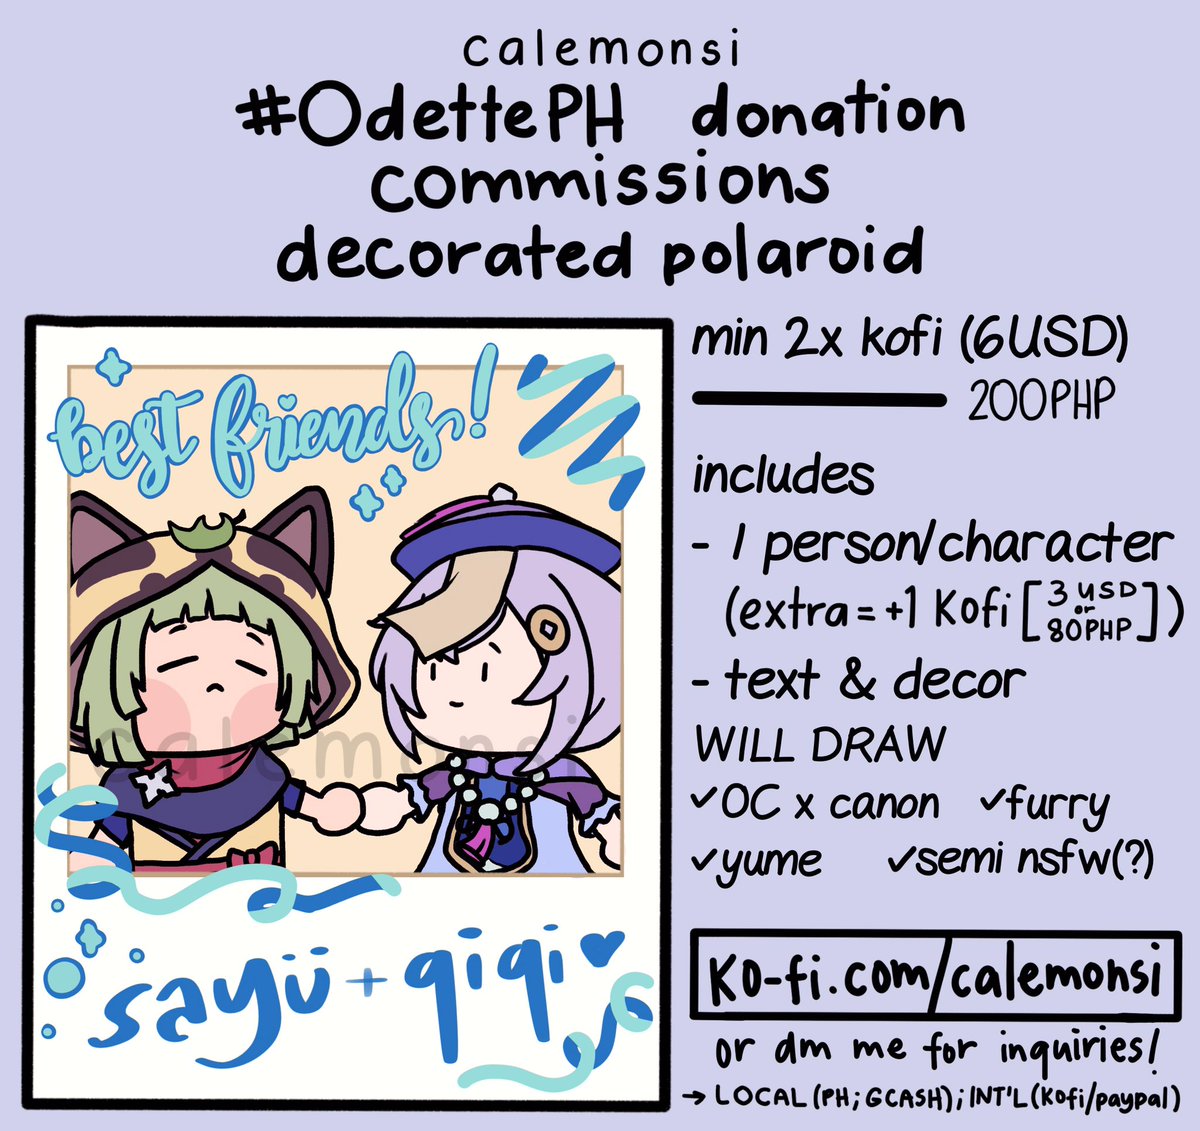 ‼️ #OdettePH donation commissions ‼️

decorated polaroid
1. DM me (@calemonsi) for comms
2. i accept gcash/paypal (100% of this style will go to donation drives)
3. minimum 6usd / 200php
4. other styles = OK 